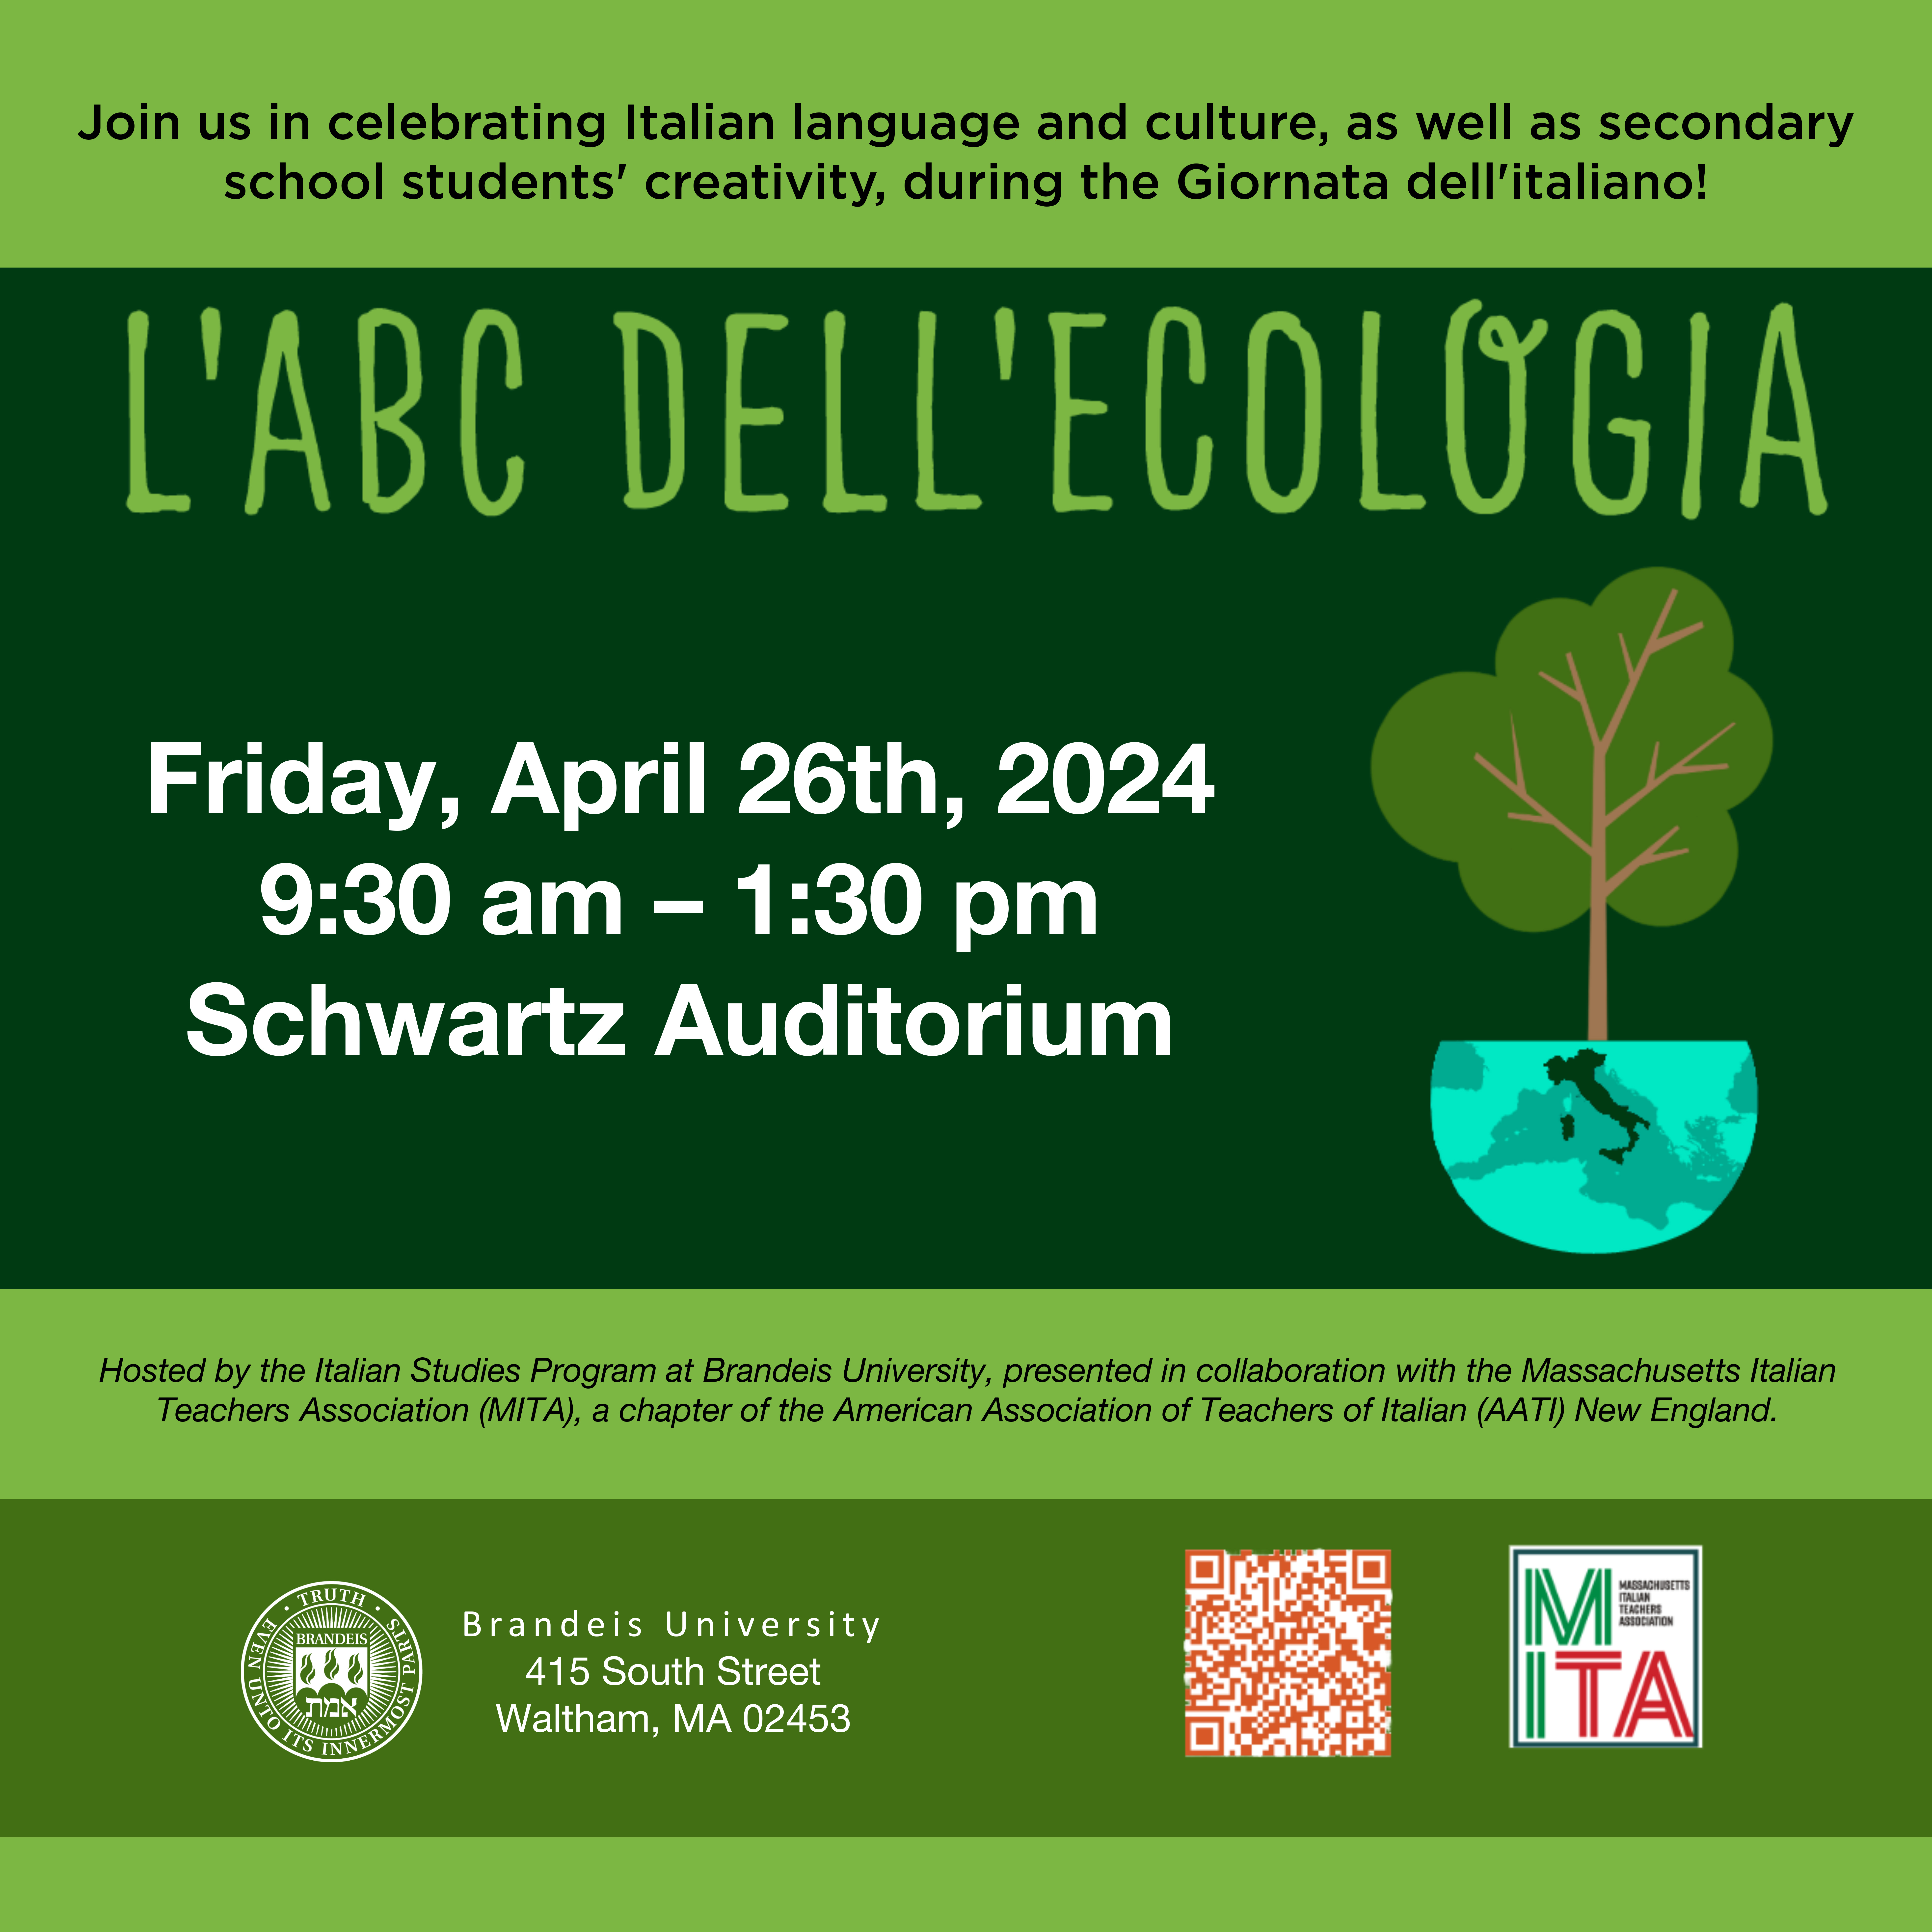 flyer for Giornata dell'italiano. green backgrounds. cartoon image of tree and Italy highlighted on globe. Brandeis seal and address, MITA logo, and QR code. all text is also included below.